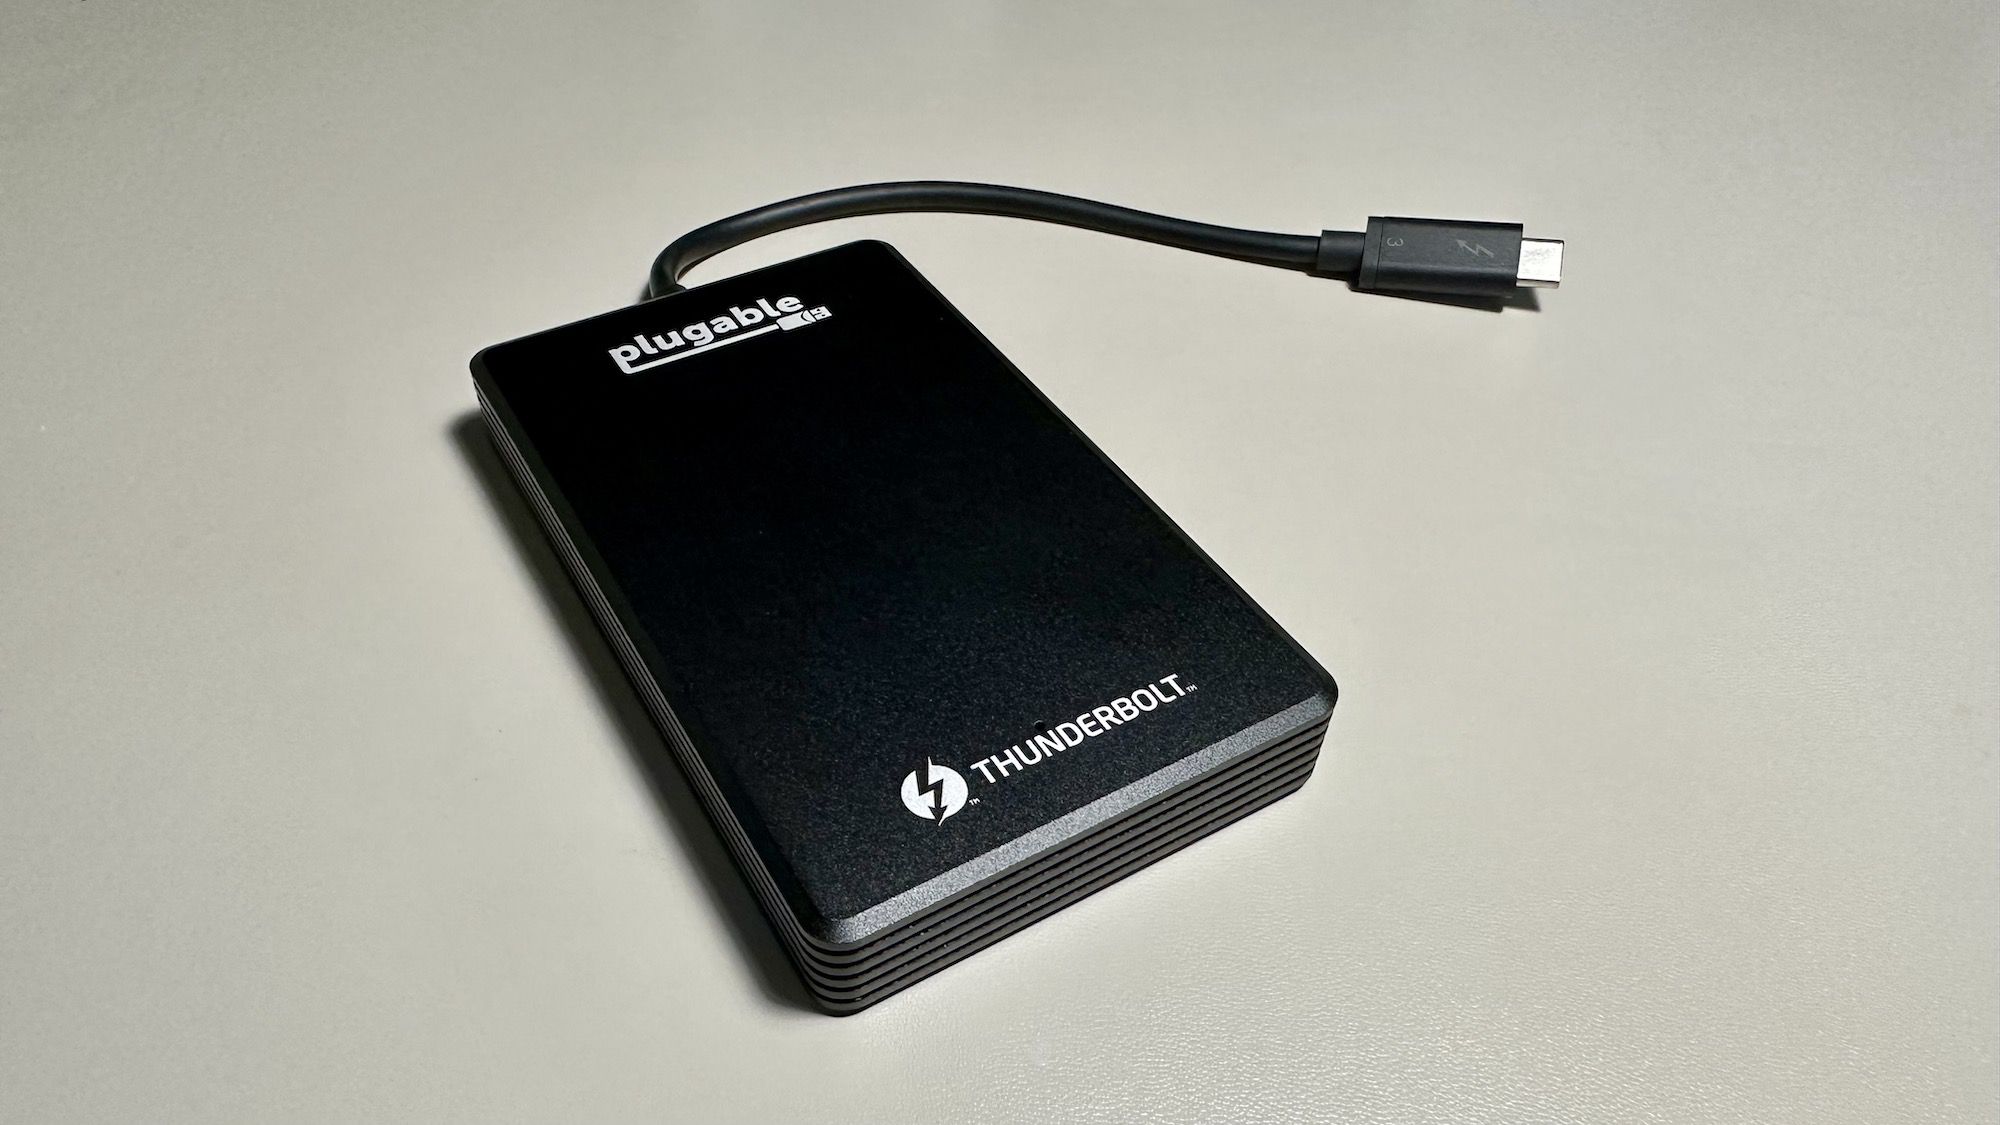 Review: Plugable's 2TB Thunderbolt SSD Offers Ultra Fast Transfer Speeds